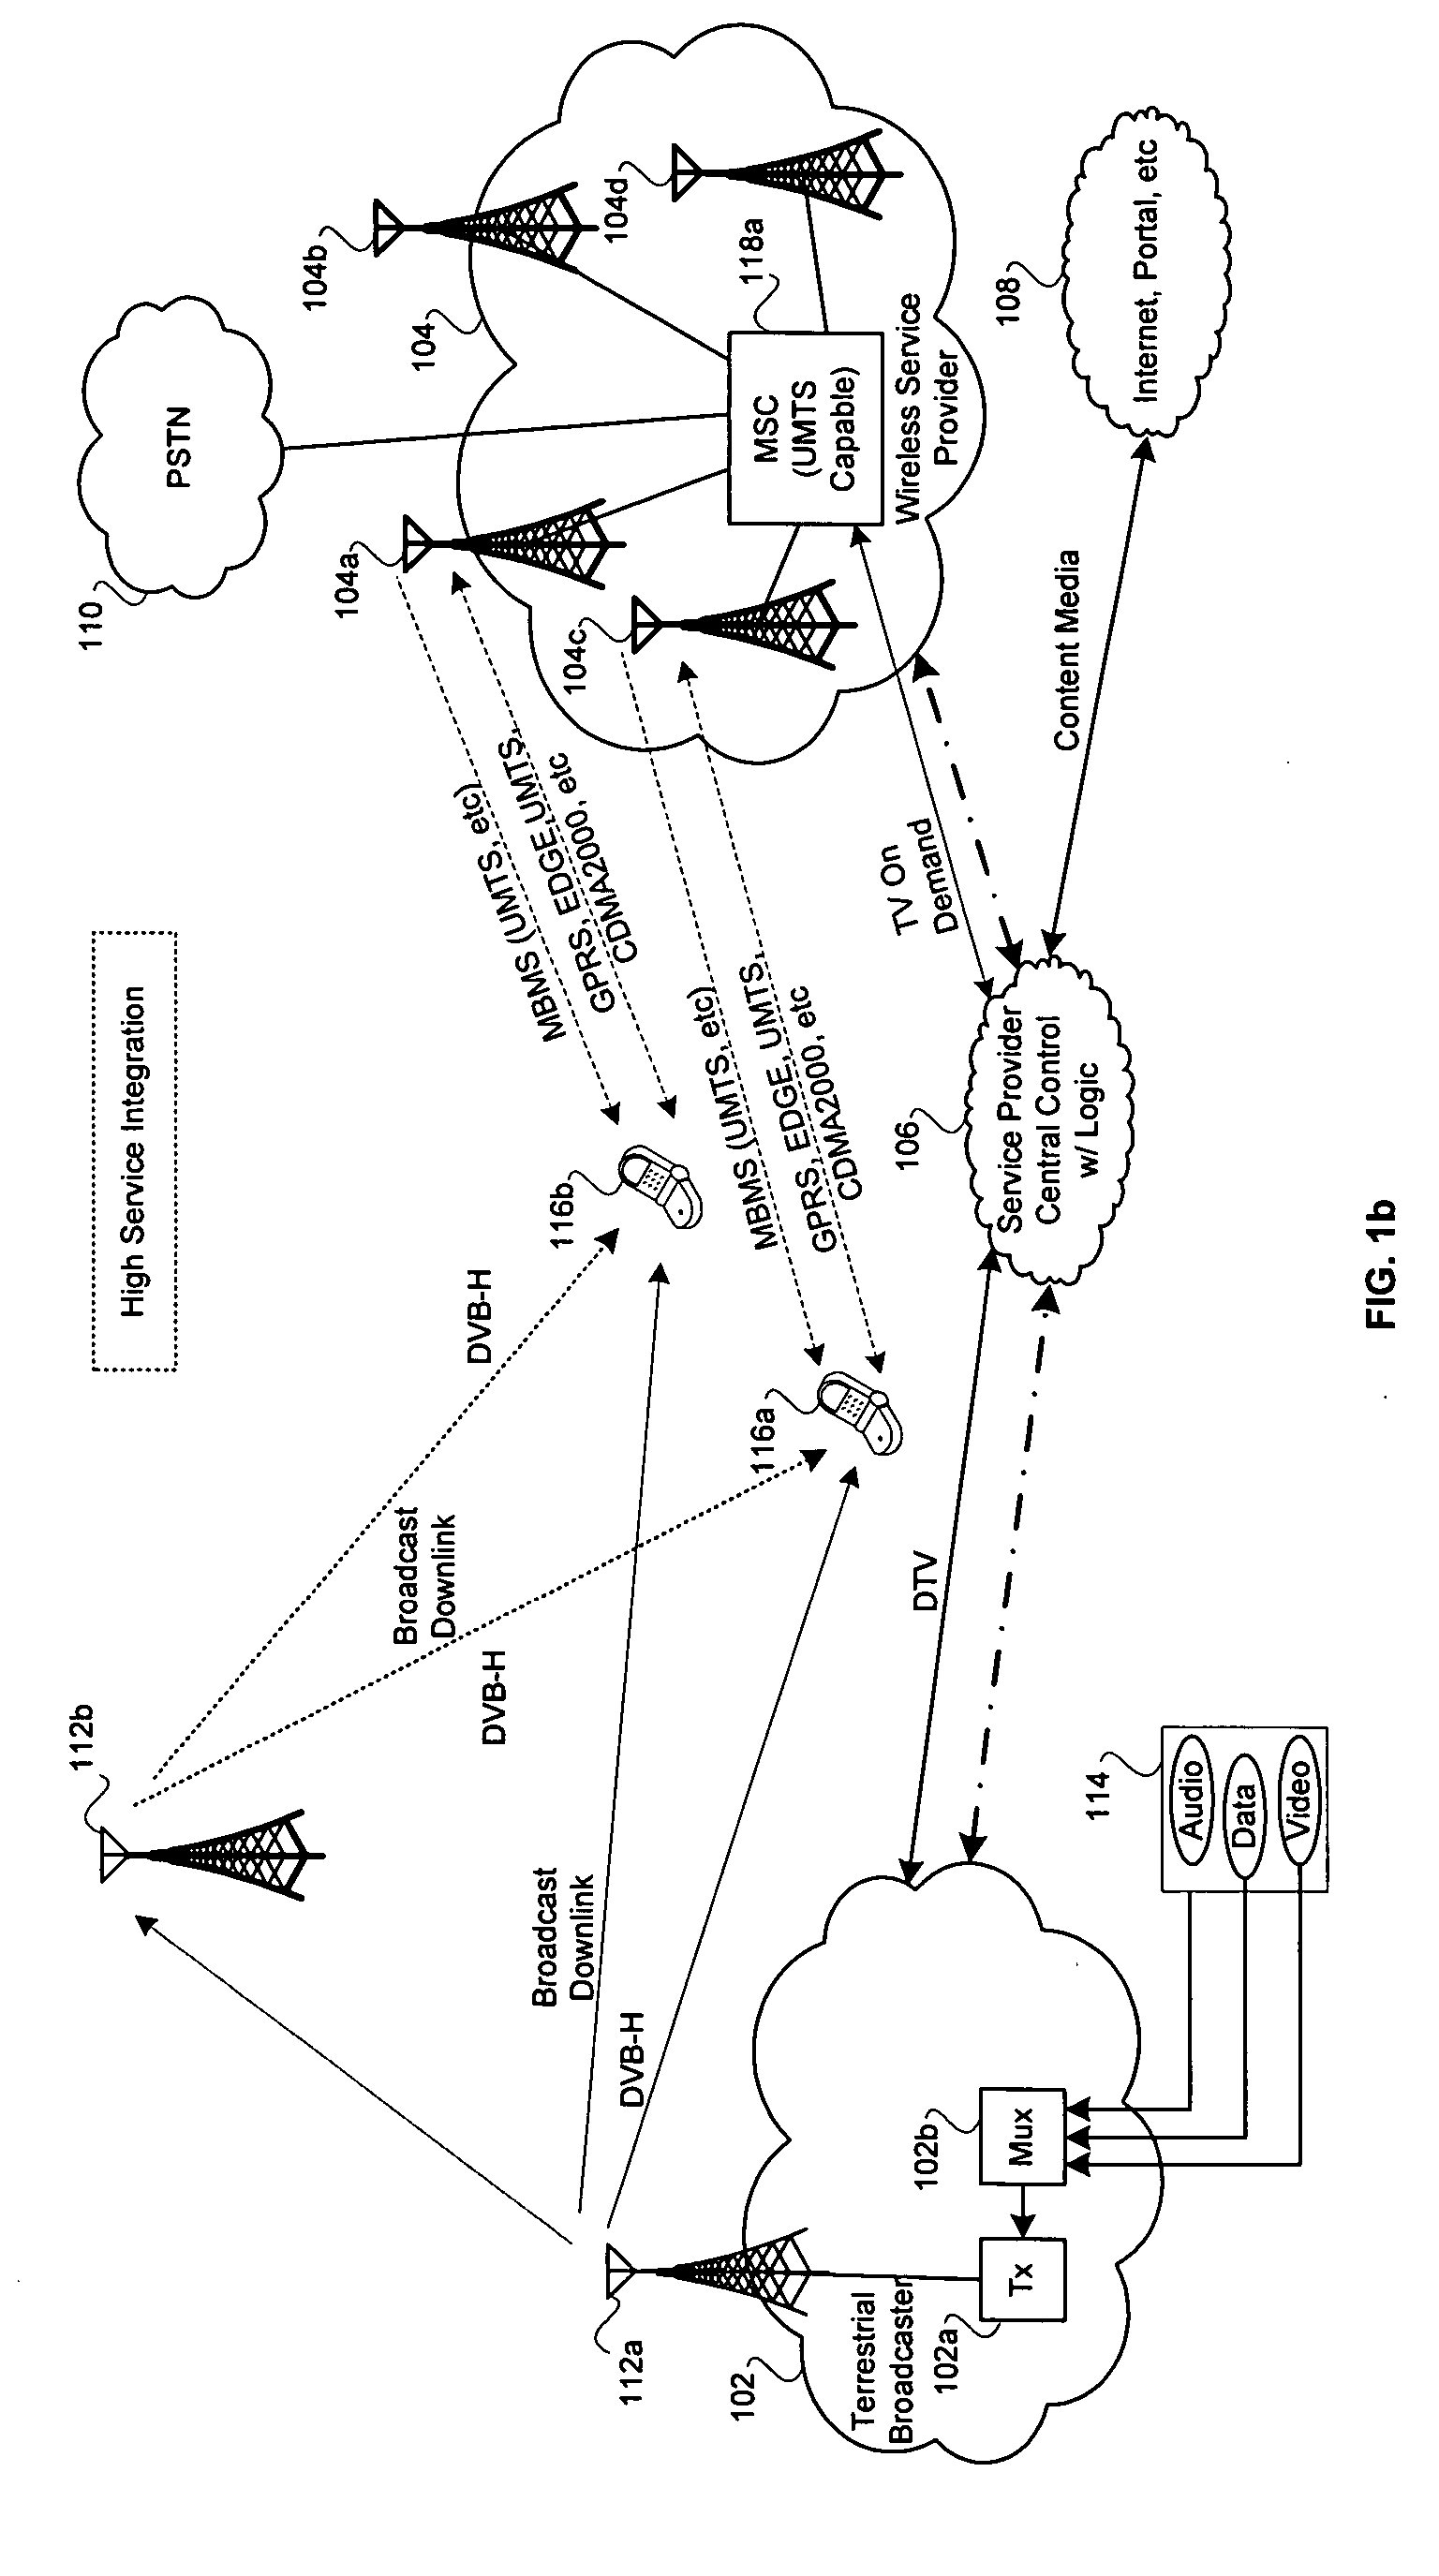 Method and system for mobile receiver antenna architecture for us band cellular and broadcasting services